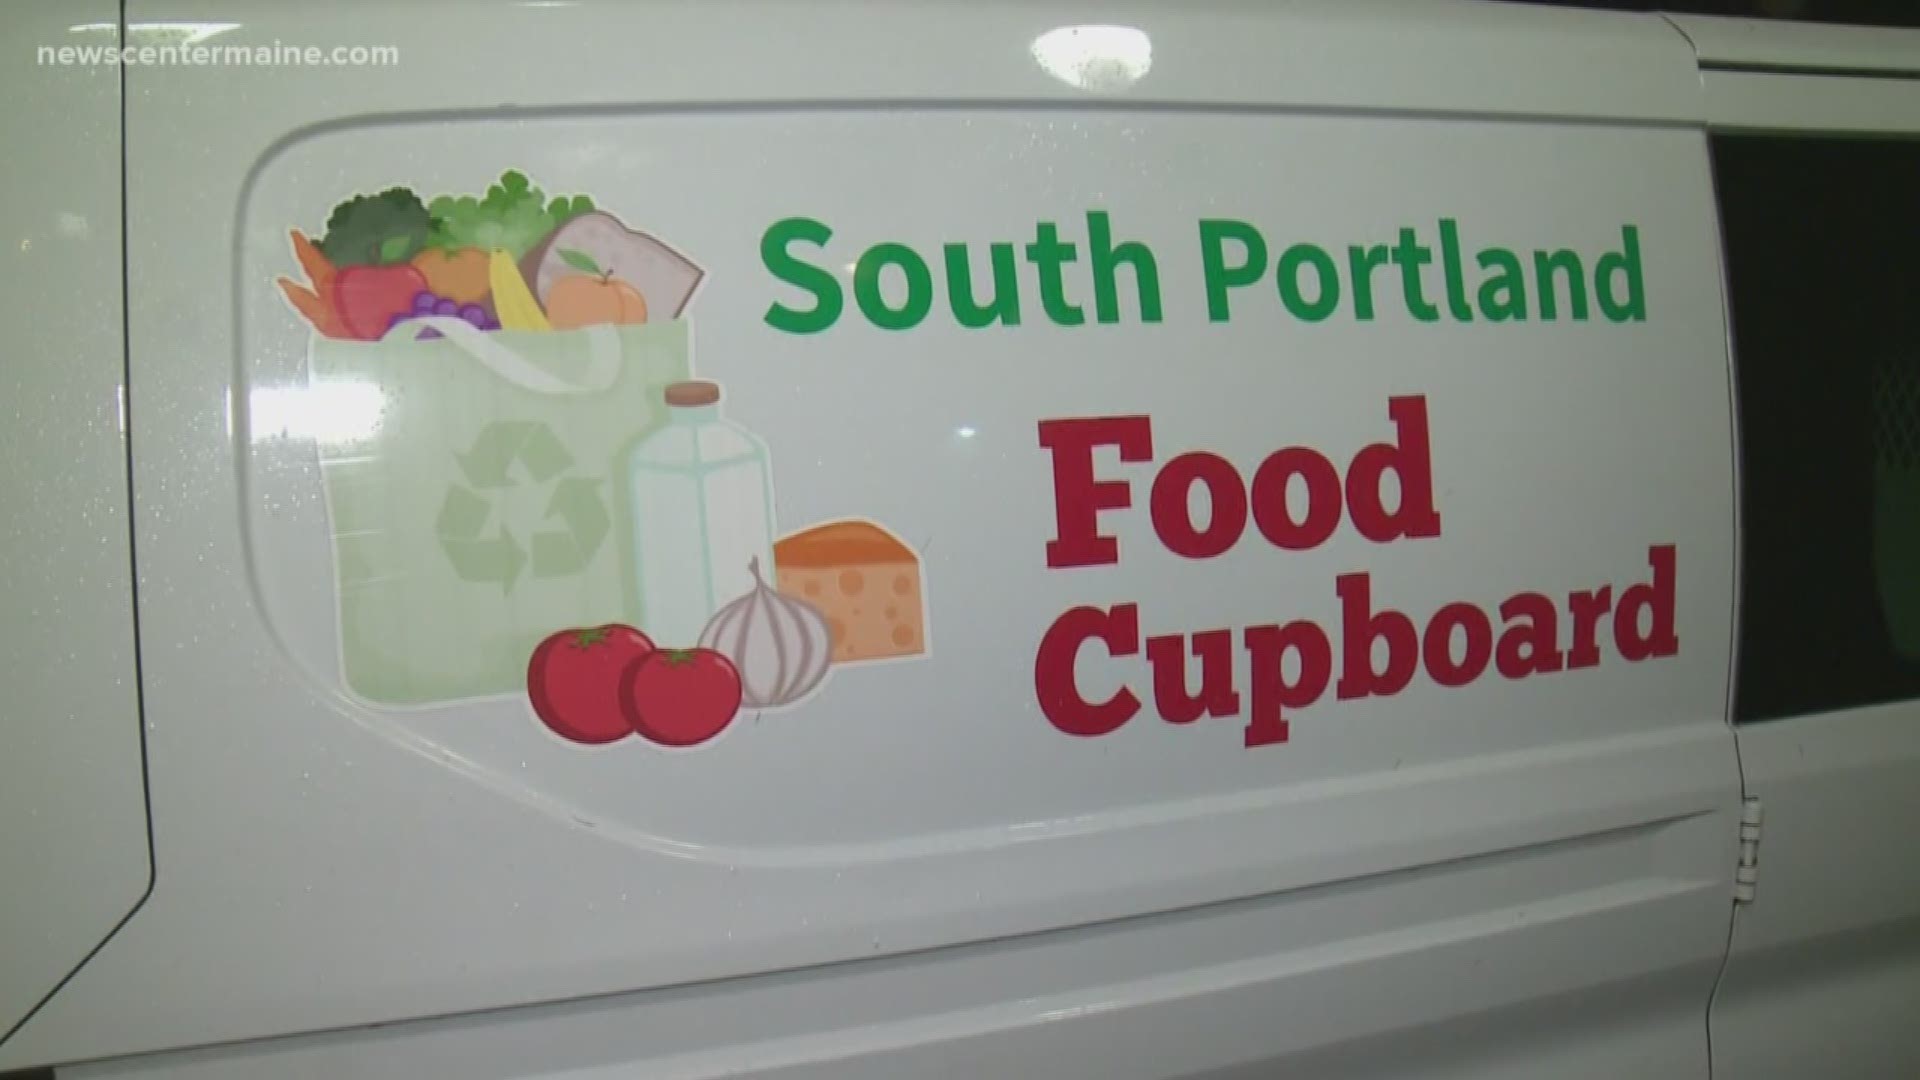 The Mariners have been collecting non-perishable food items for the South Portland food cupboard...